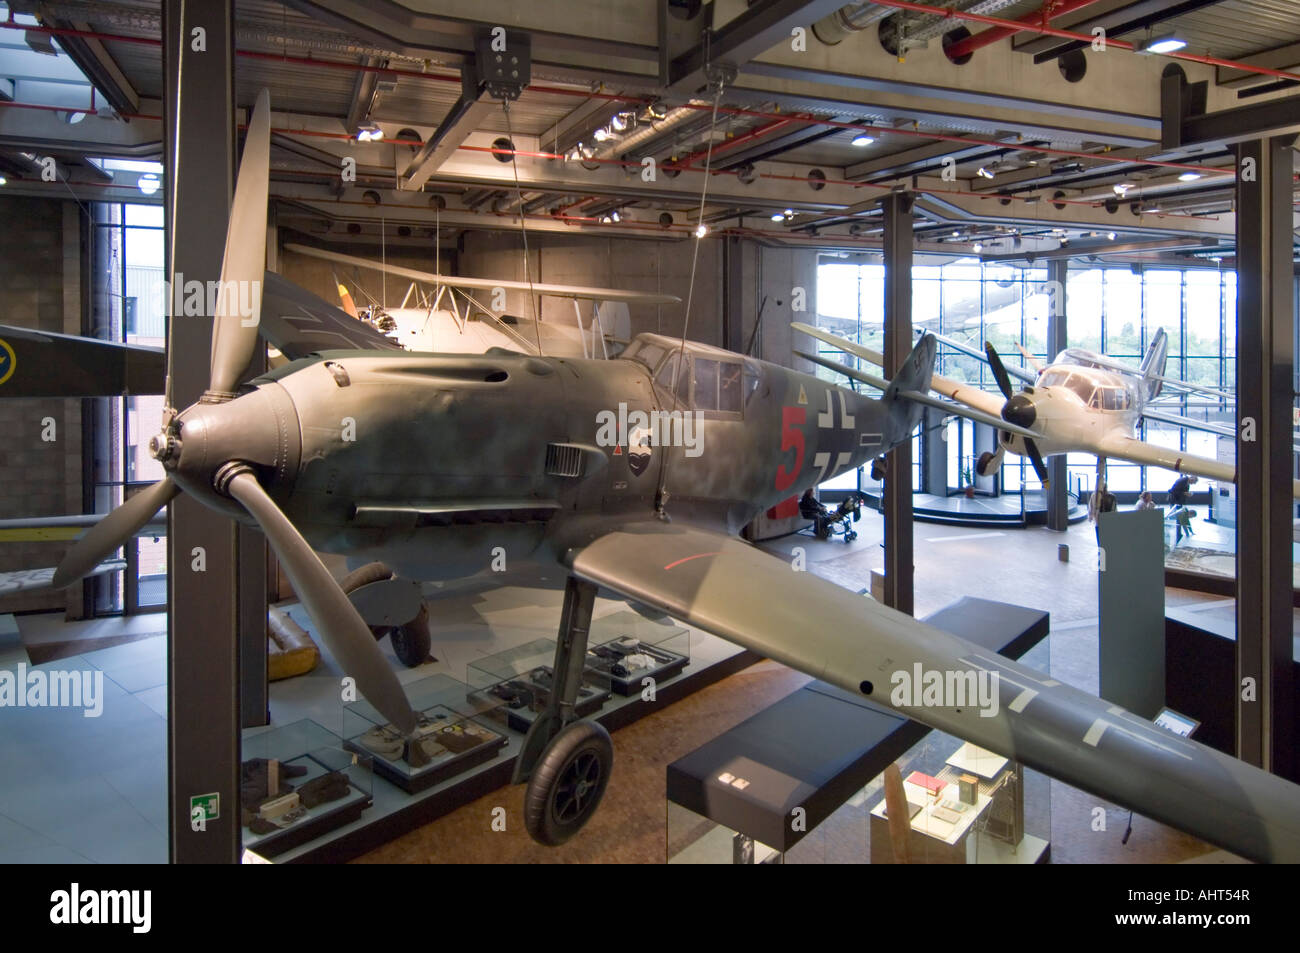 A Messerschmitt Bf 109 - one of the exhibits in the Deutsches Technikmuseum - German Museum of Technology. Stock Photo